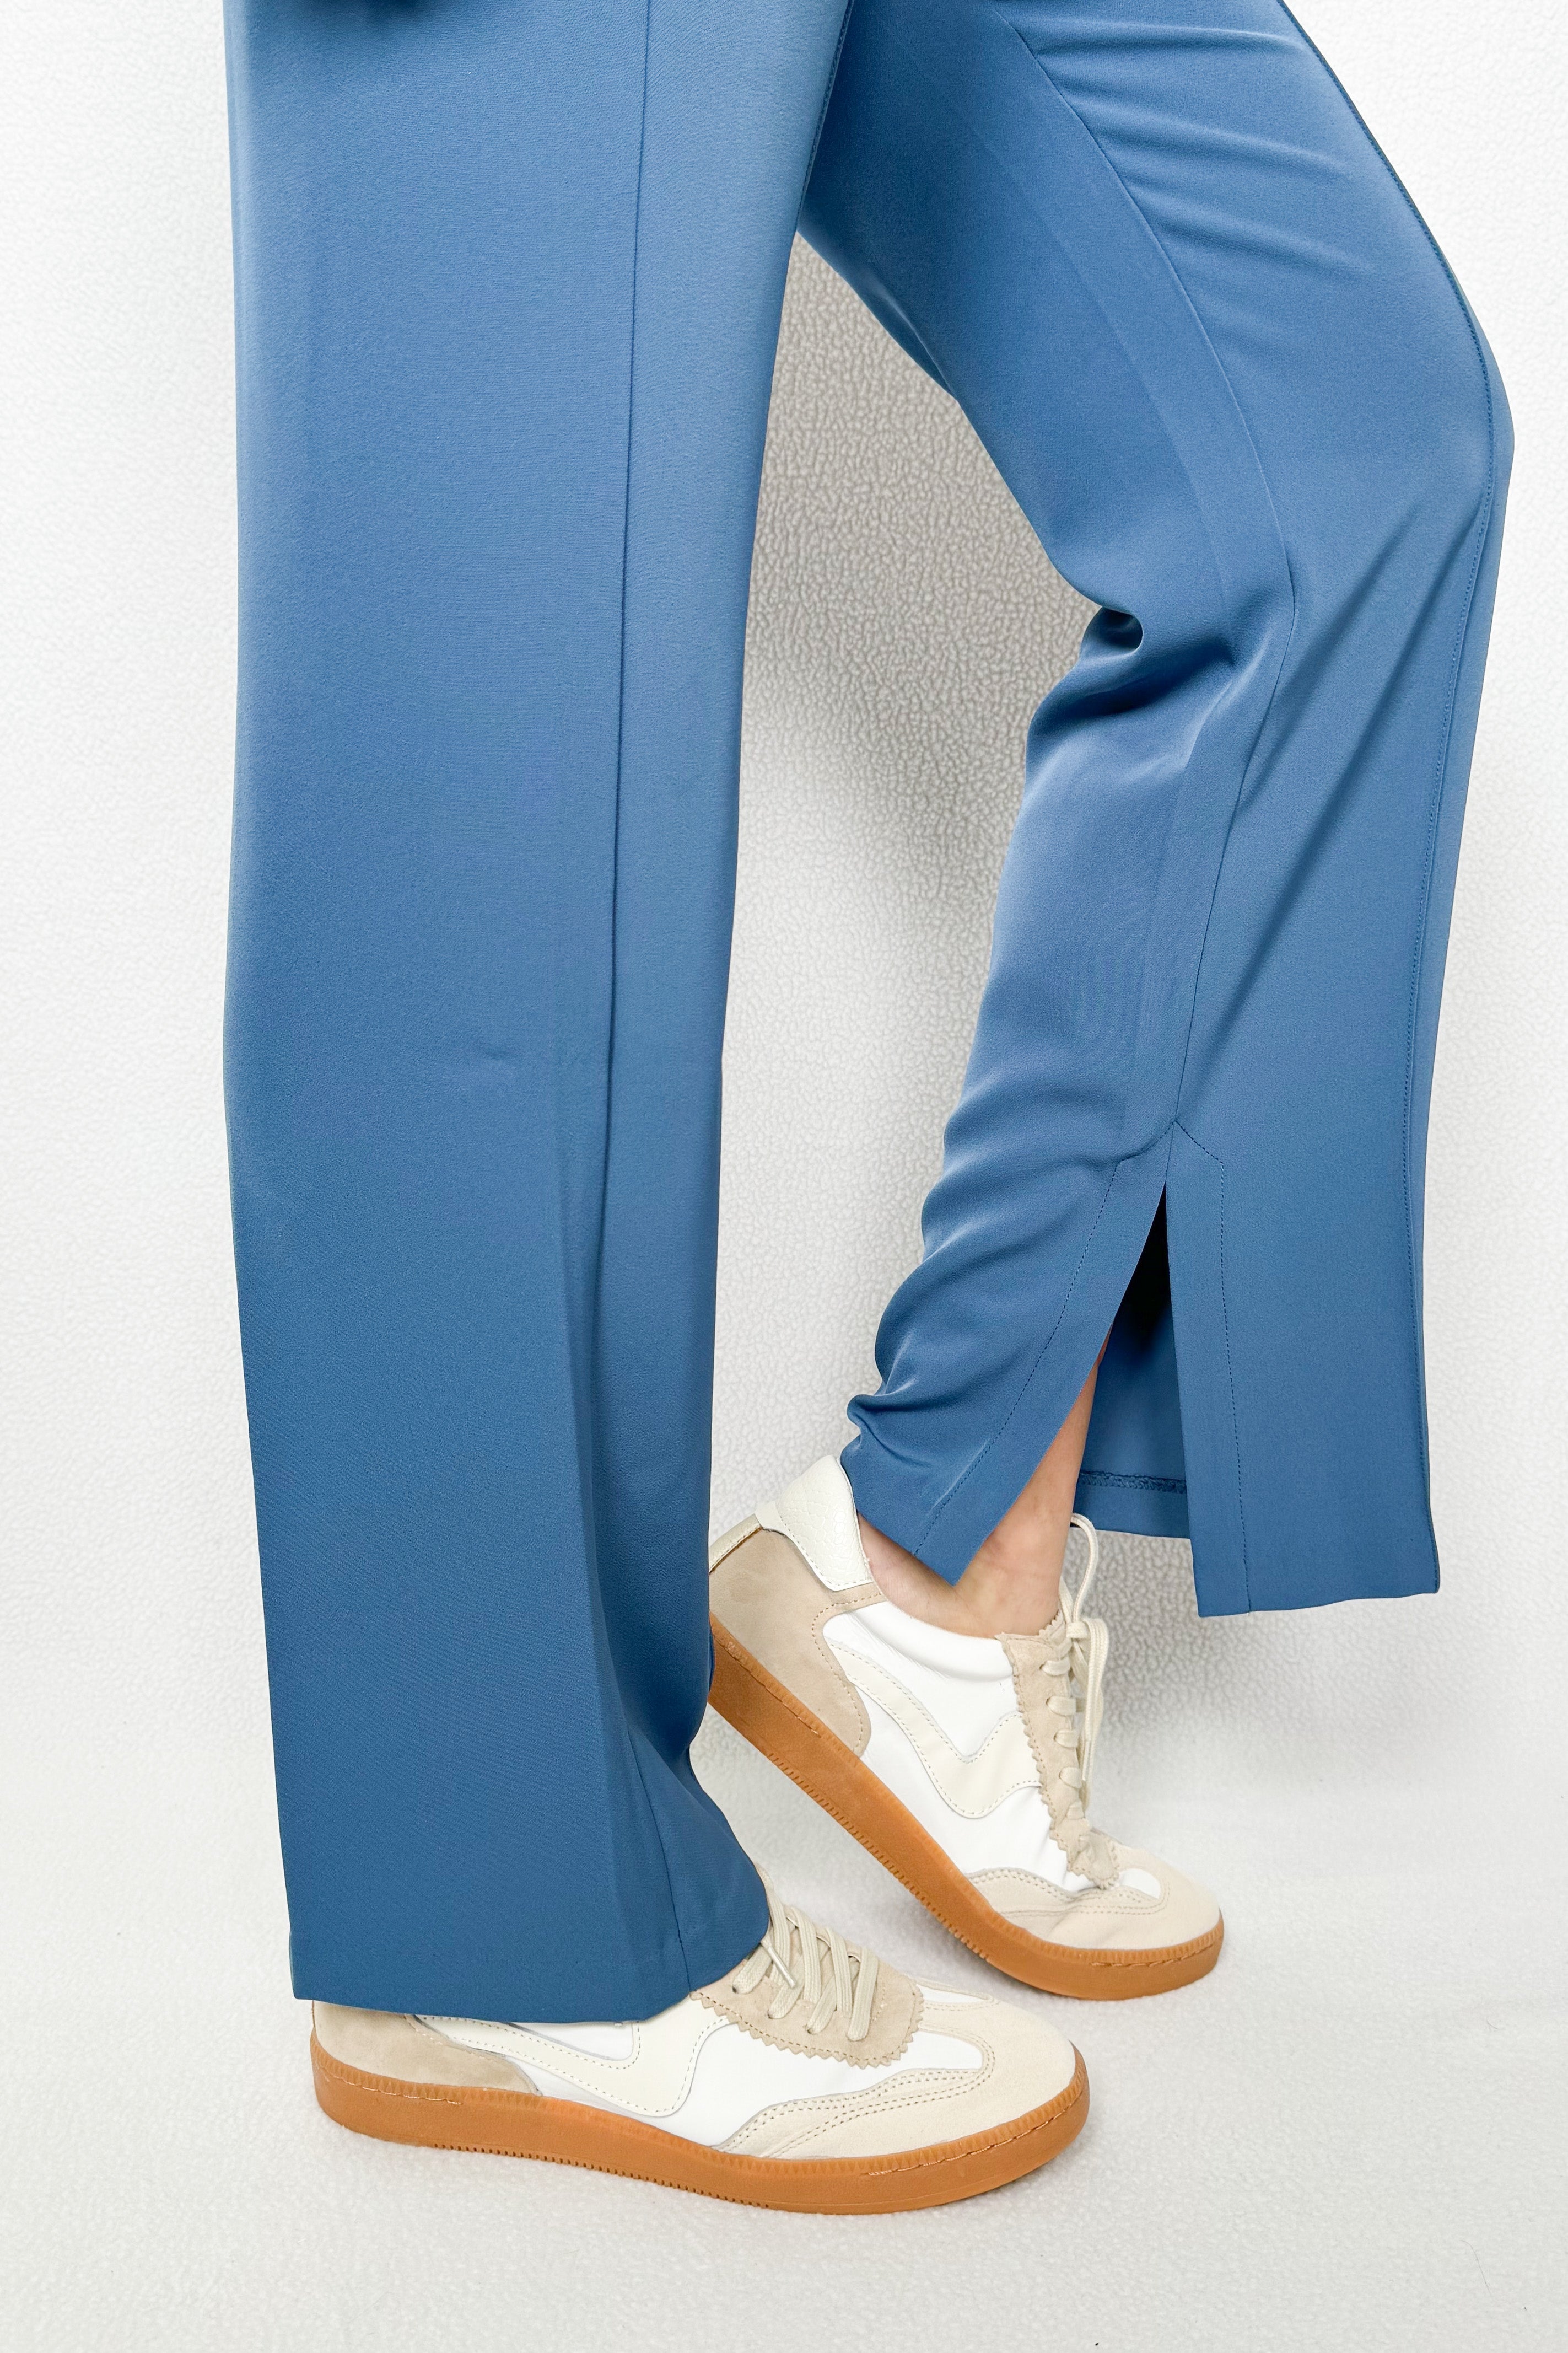 Adeline Relaxed Fit Pant